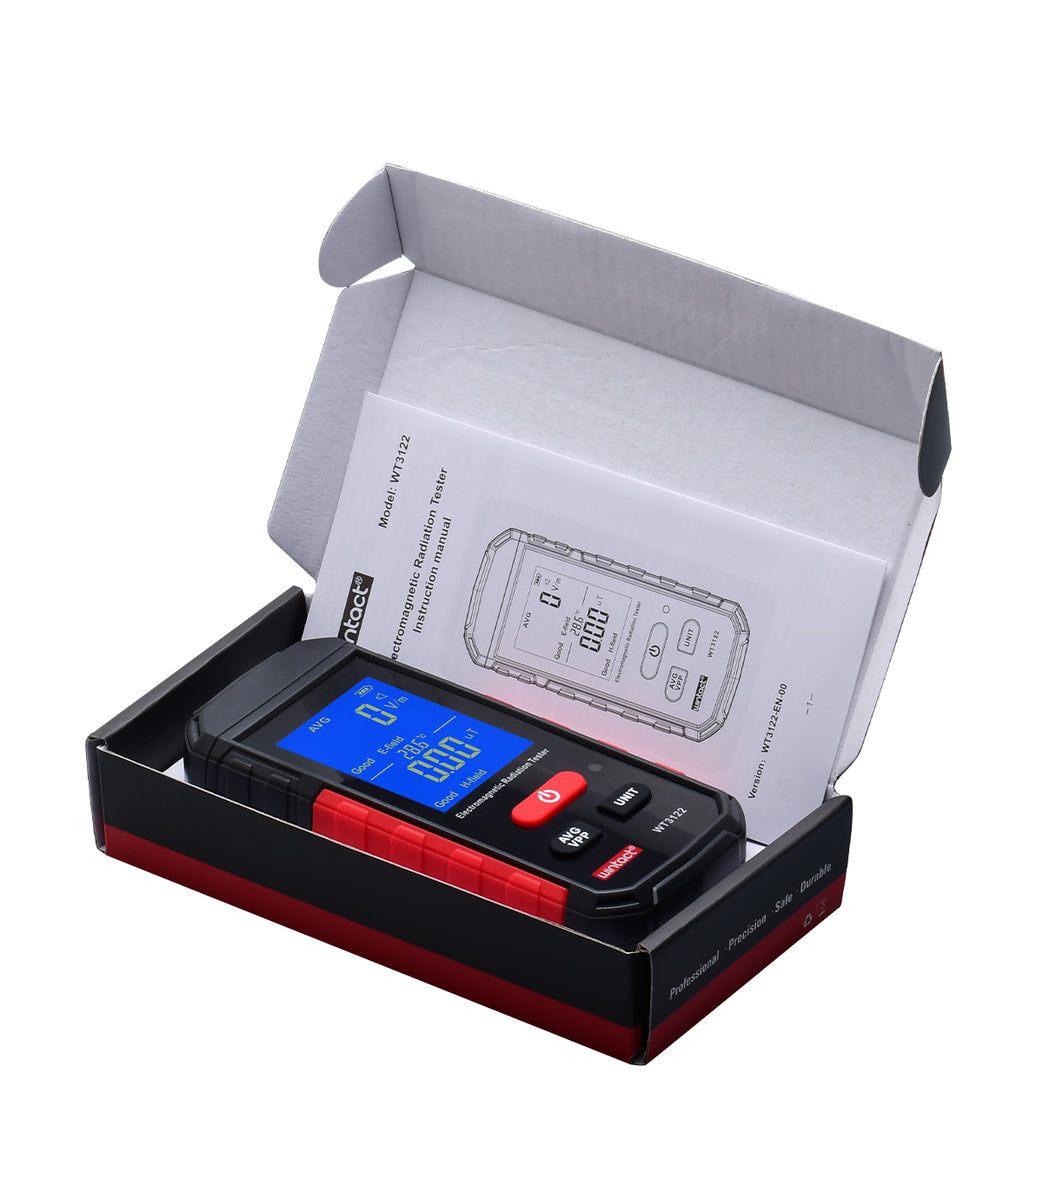 WINTACT - ELECTROMAGNETIC RADIATION TESTER - USB RECHARGEABLE (WT3122)